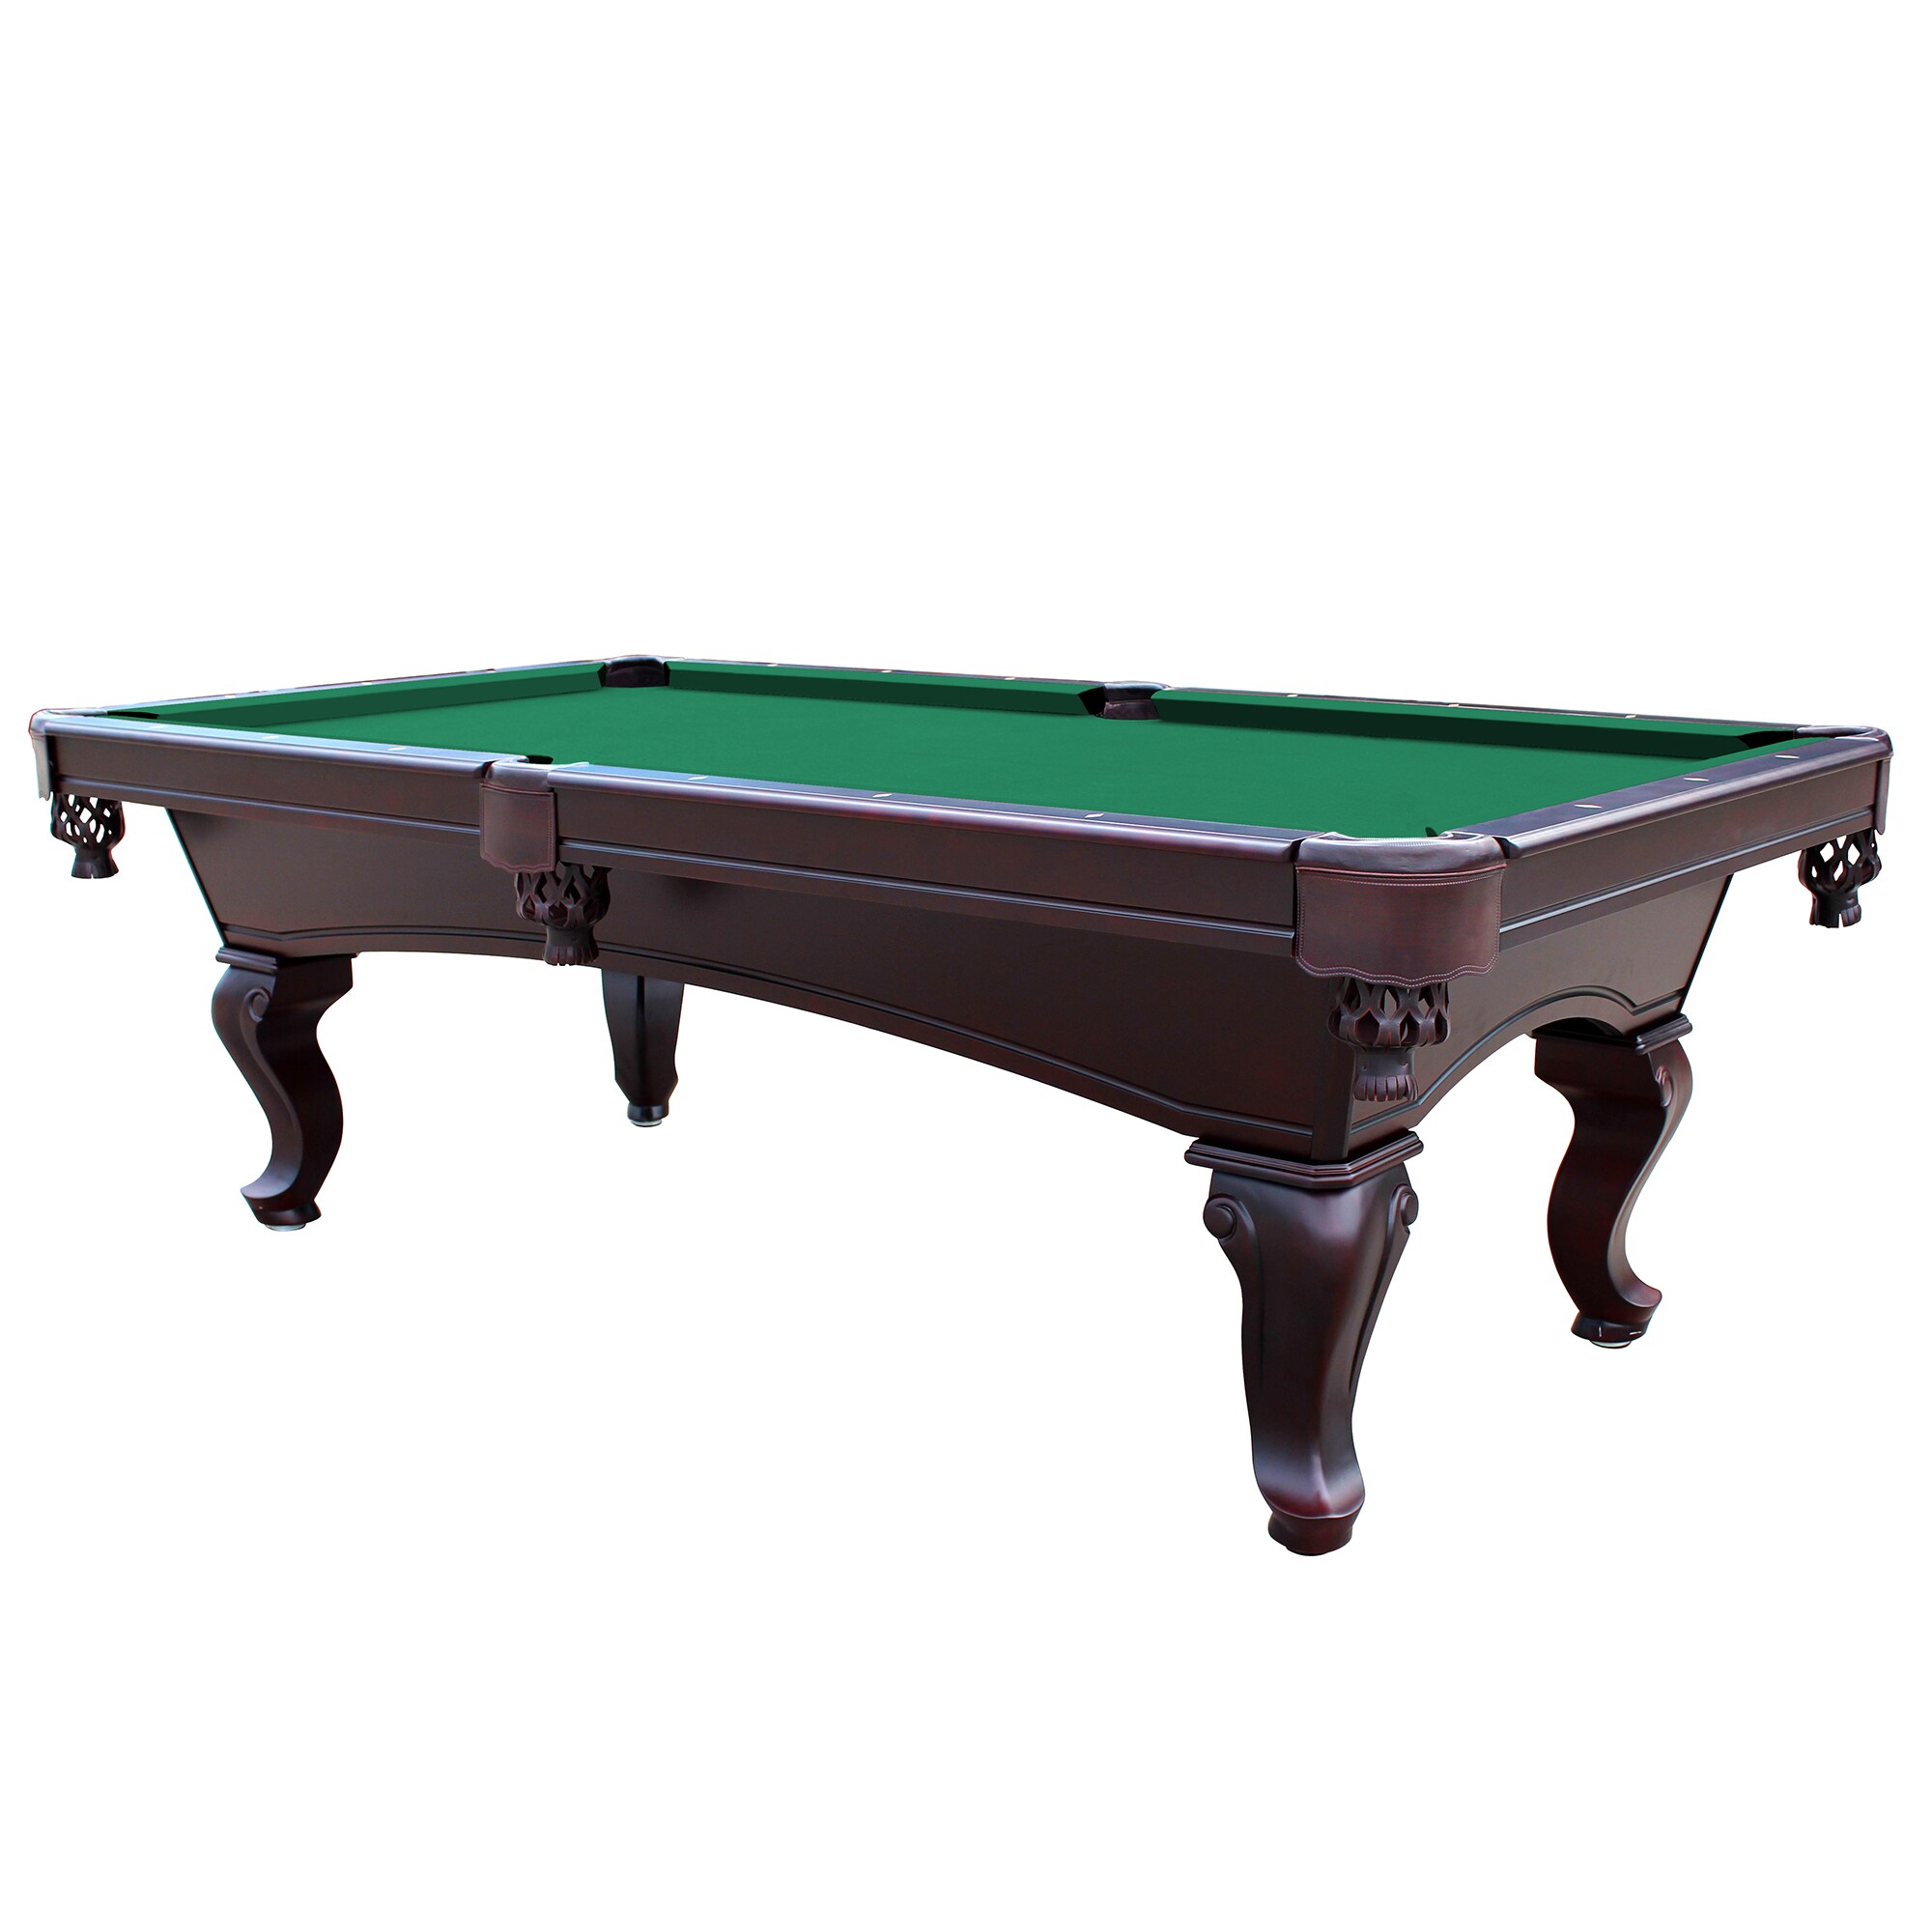 At søge tilflugt Undertrykke sund fornuft Championship Championship Saturn II 8-ft Billiard Cloth in the Pool Table  Accessories department at Lowes.com